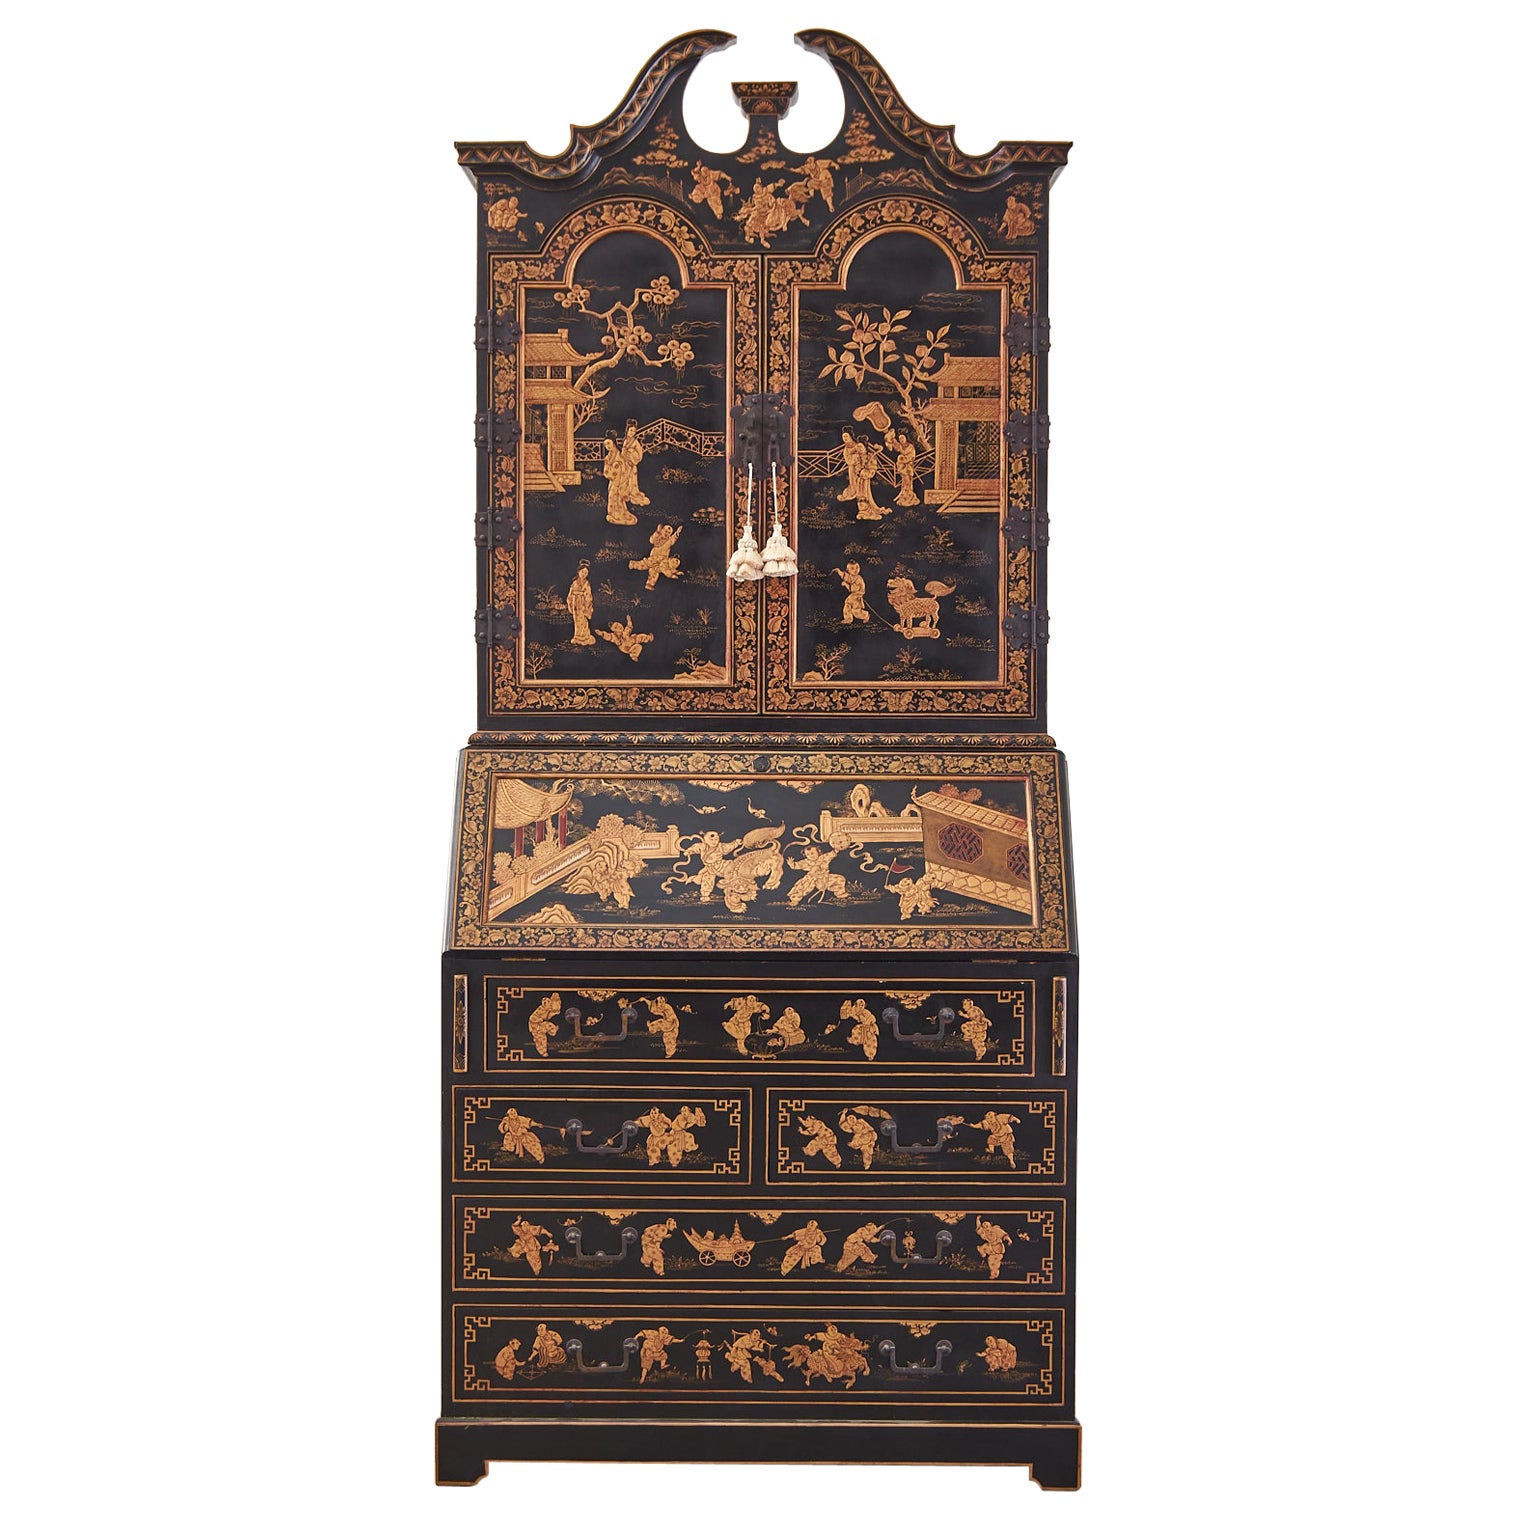 English George III Style Chinoiserie Lacquered Secretaire Bookcase